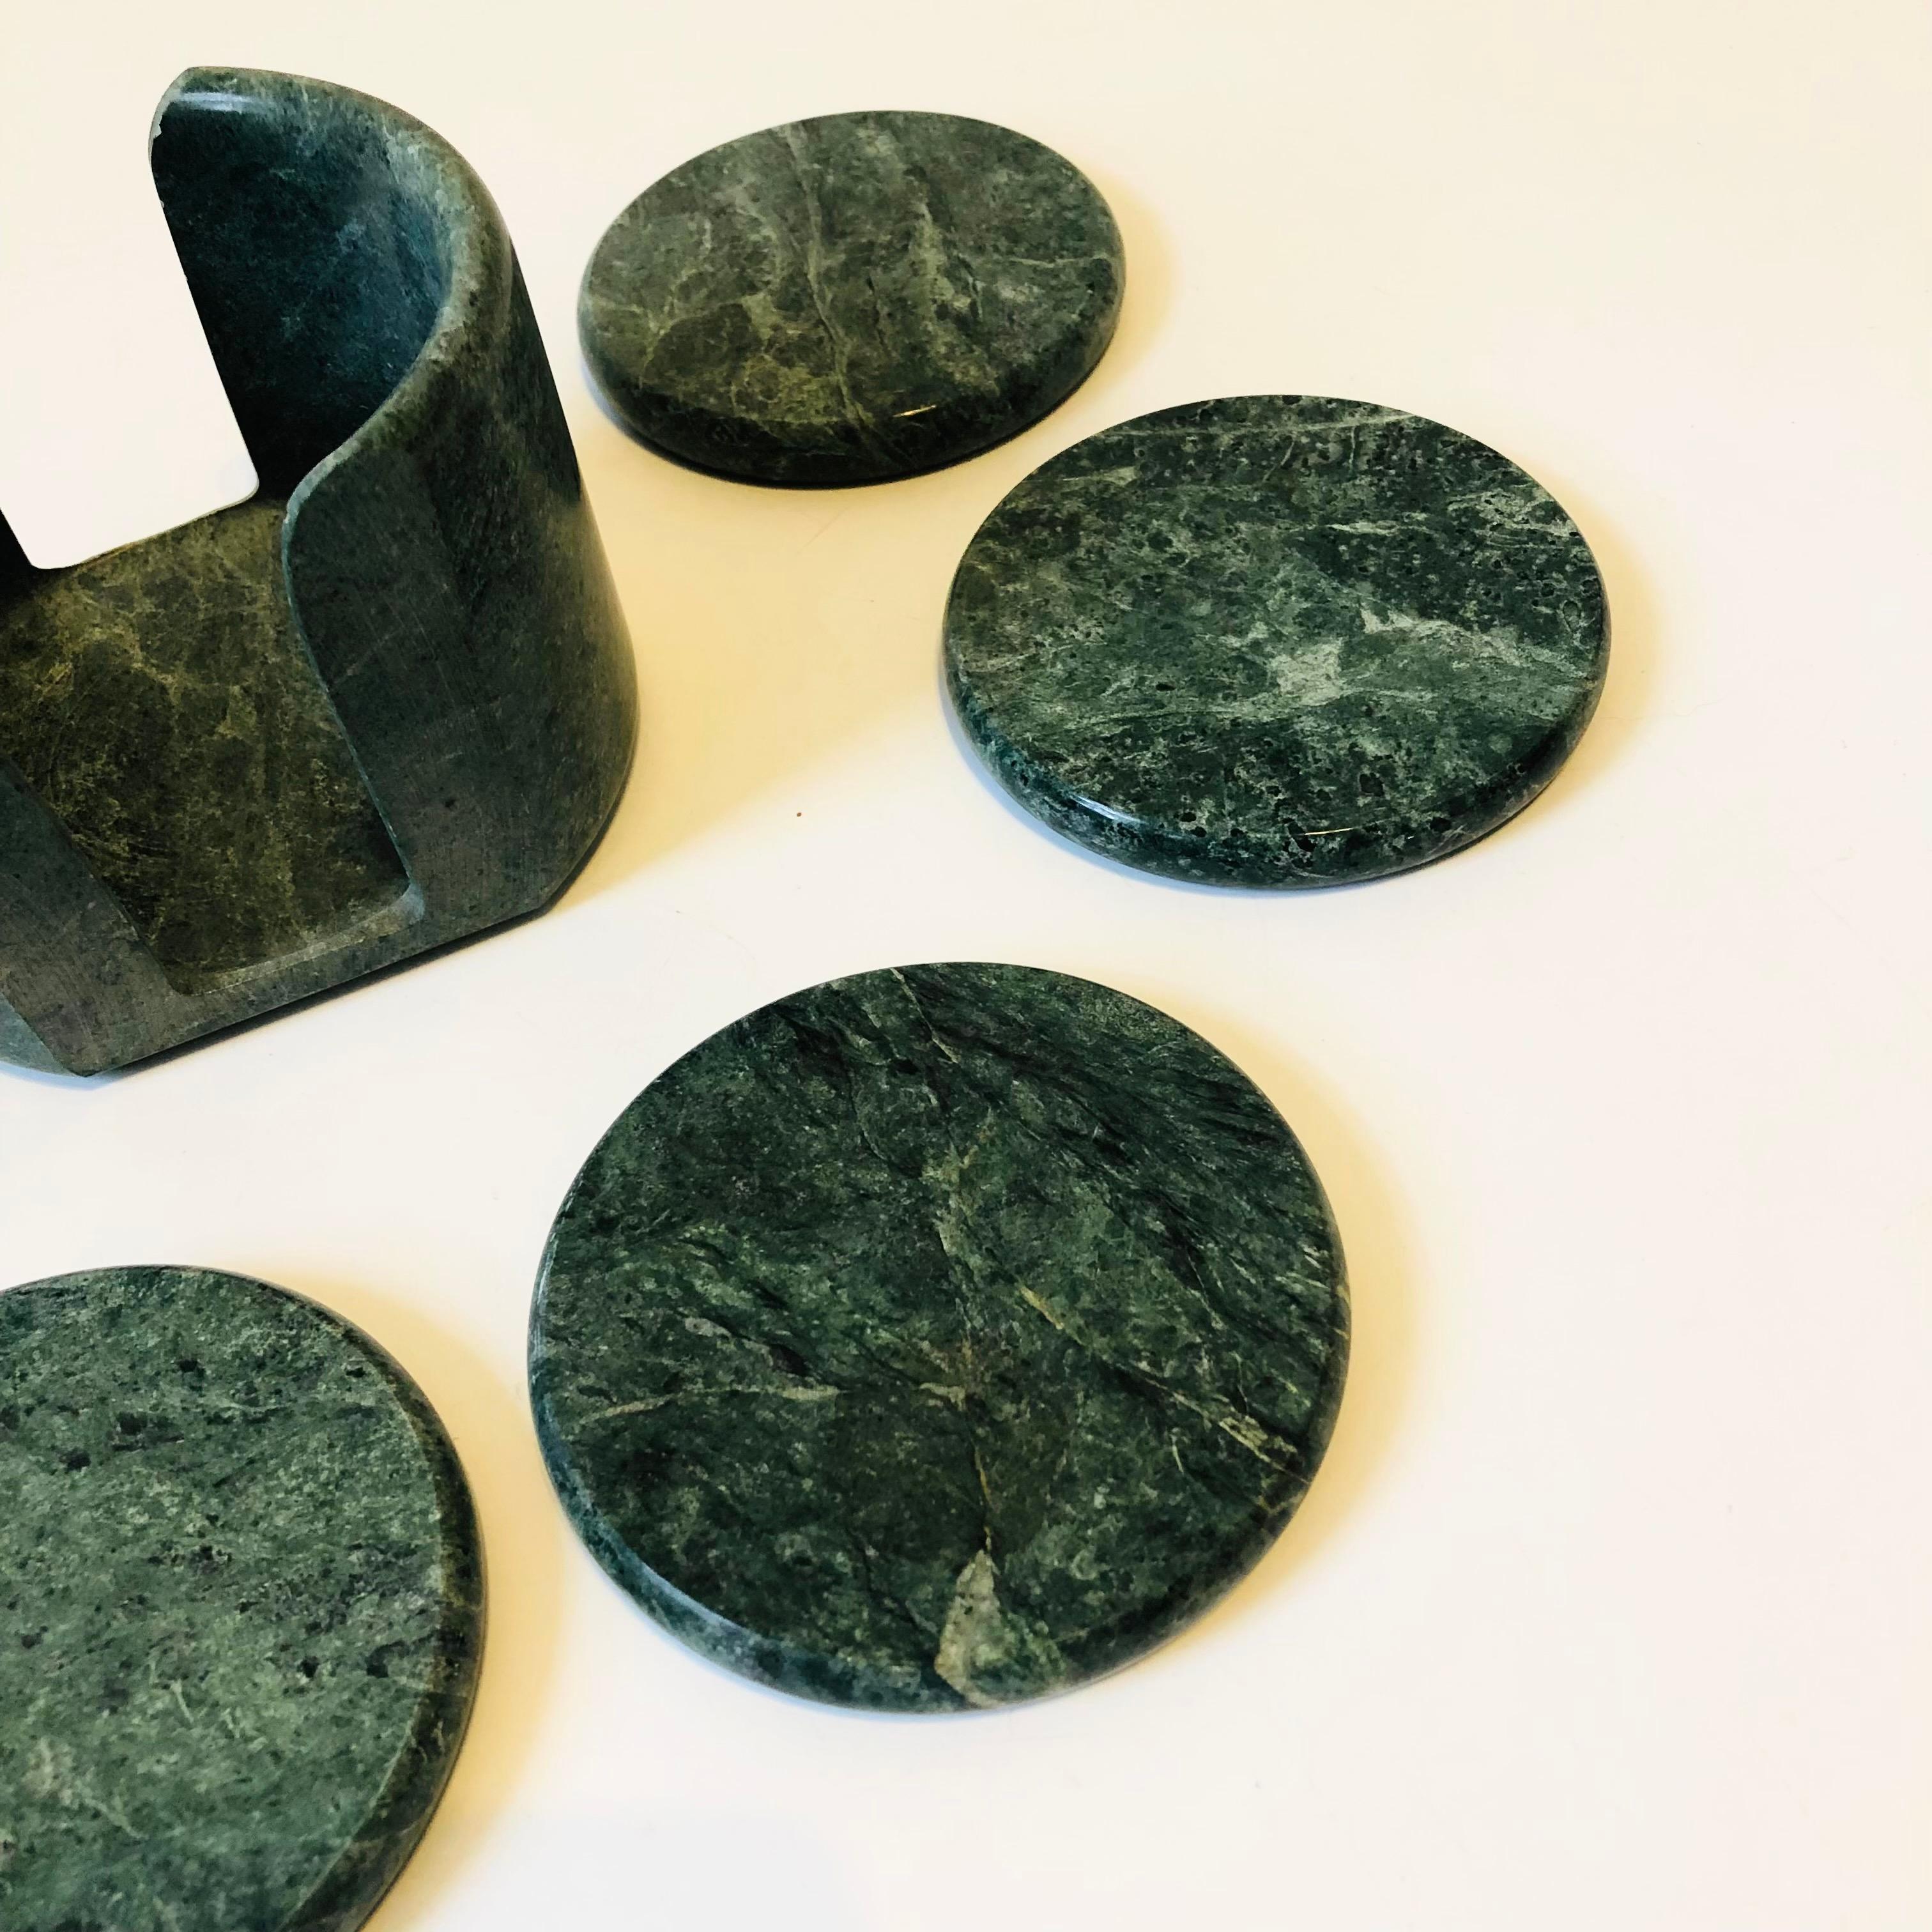 20th Century Green Stone Coaster Set - Set of 6 Coasters in Holder